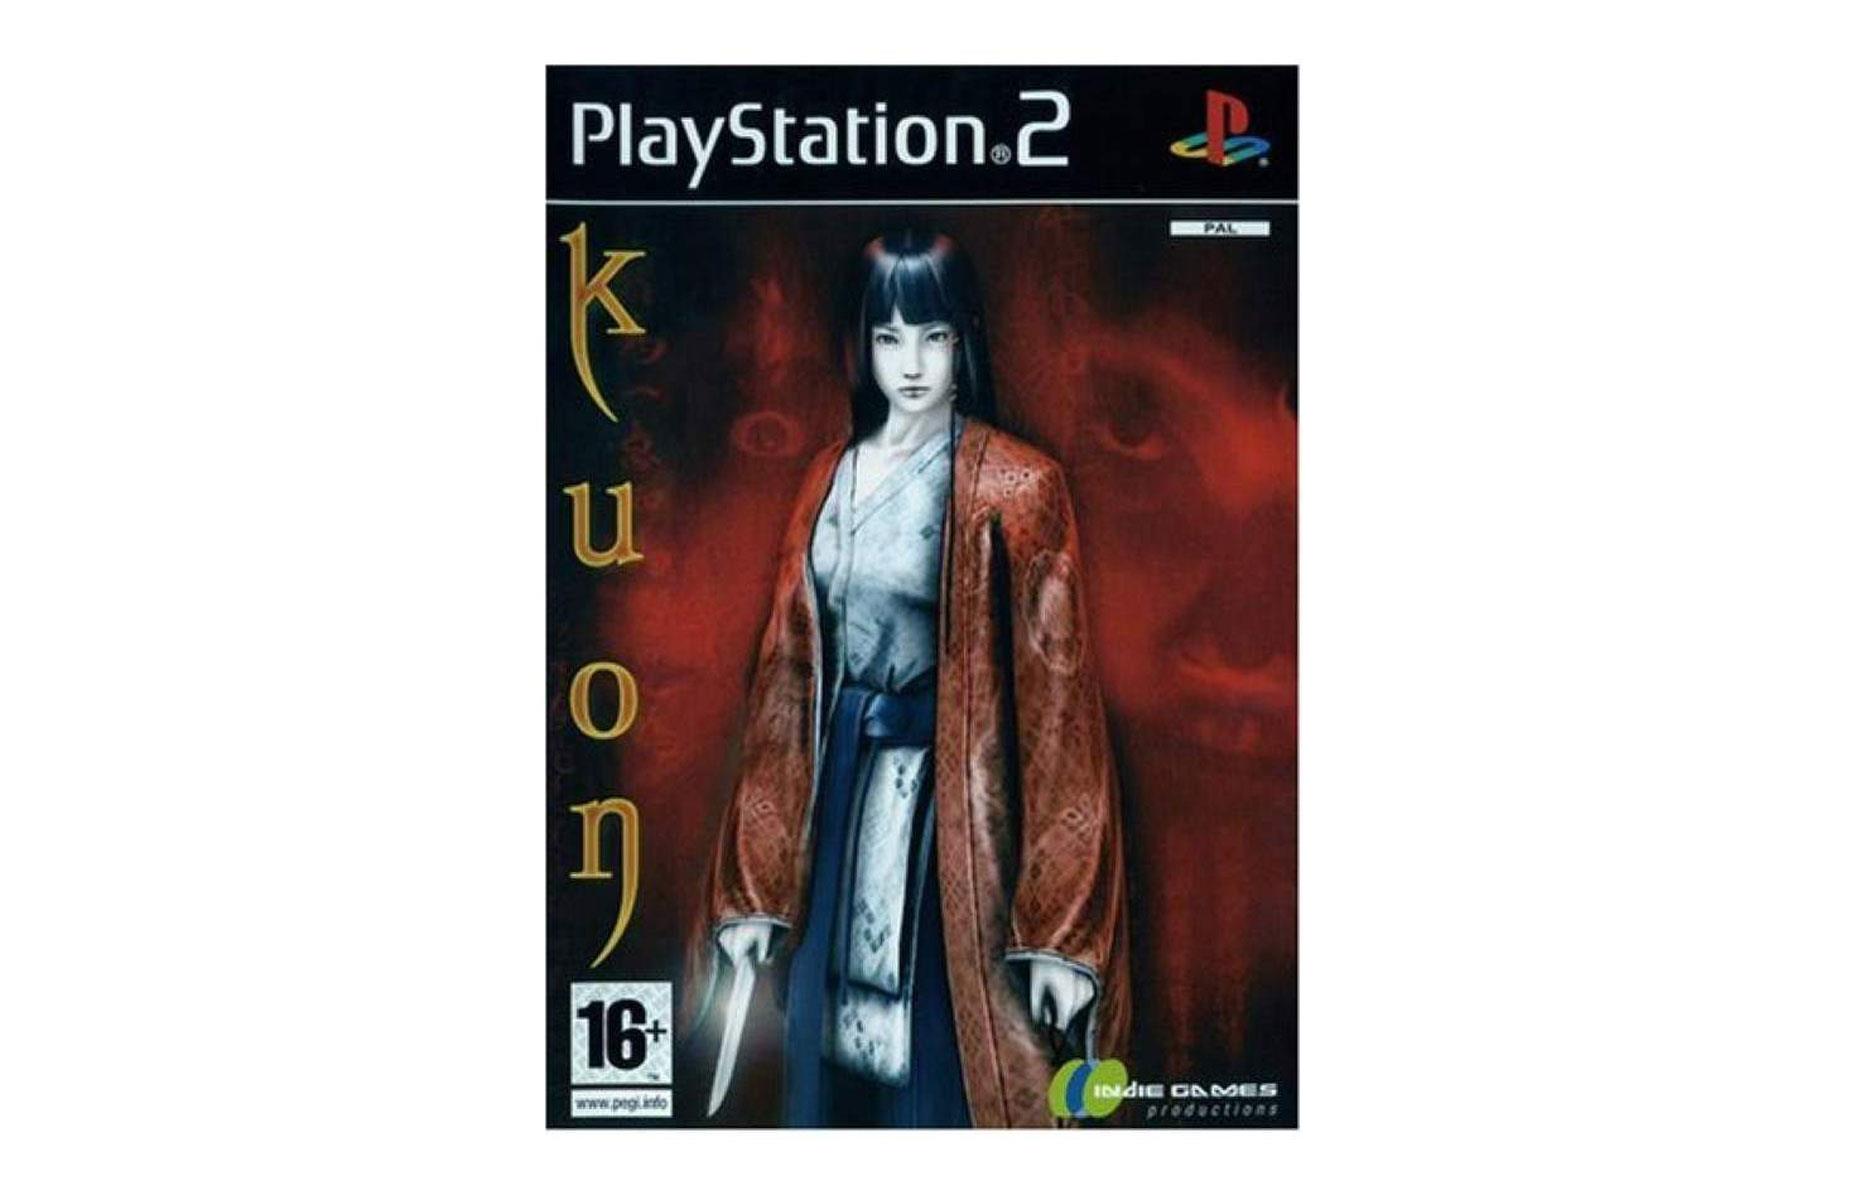 Kuon (Agetec/Indie Games) for Sony PlayStation 2, 2004: up to $780 (£560)